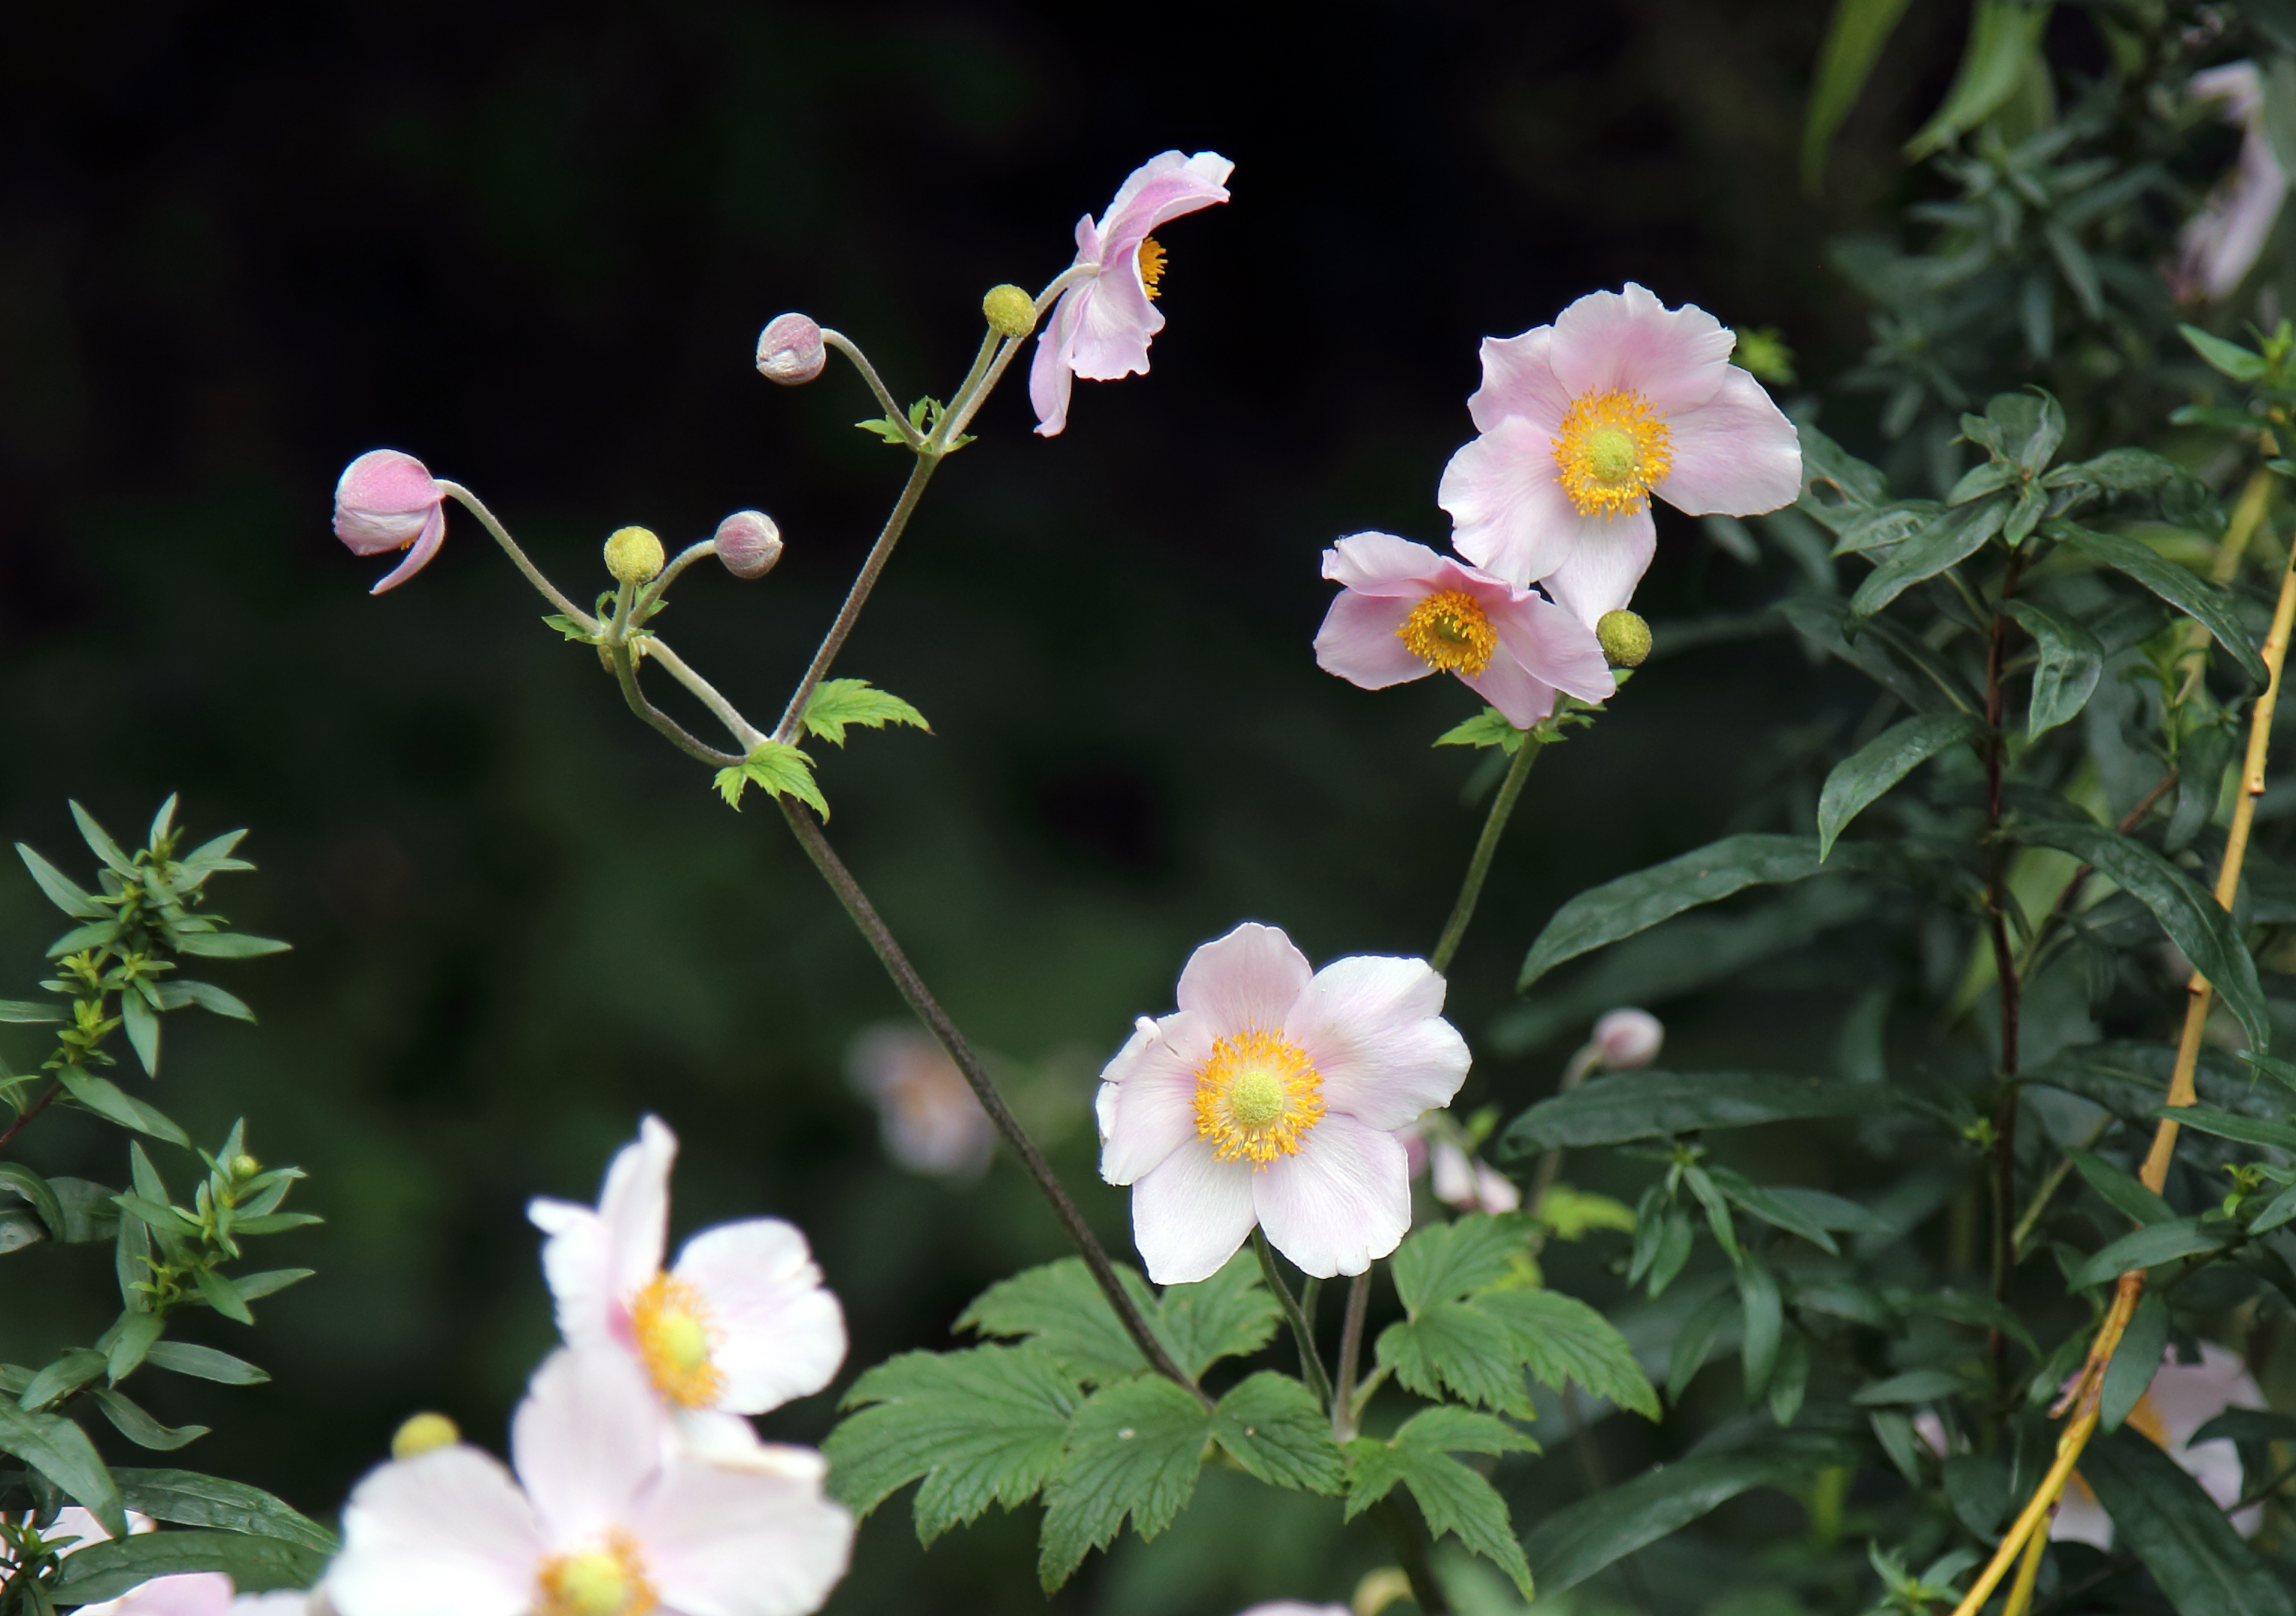 'Chinese anemone' at Clavering Essex England28